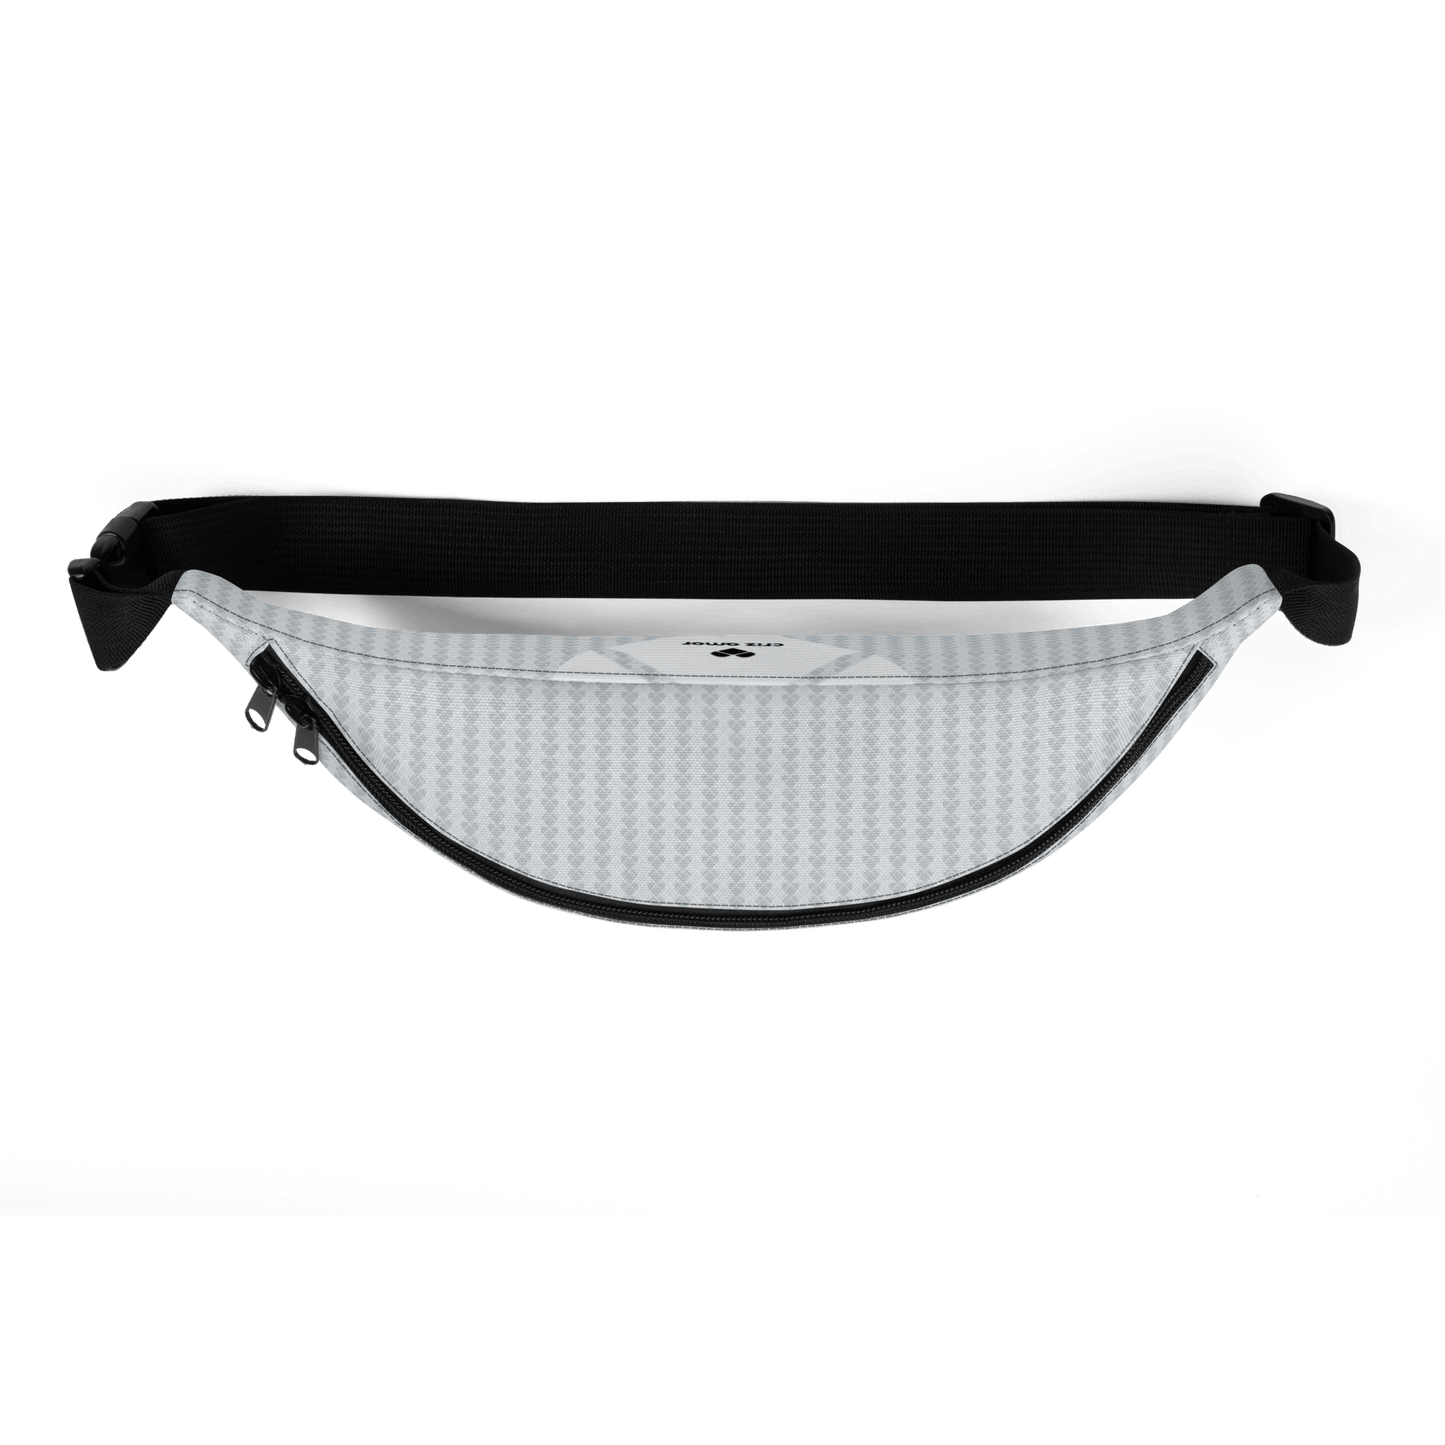 top view of a Genderless fanny pack with Lovogram heart logo design.